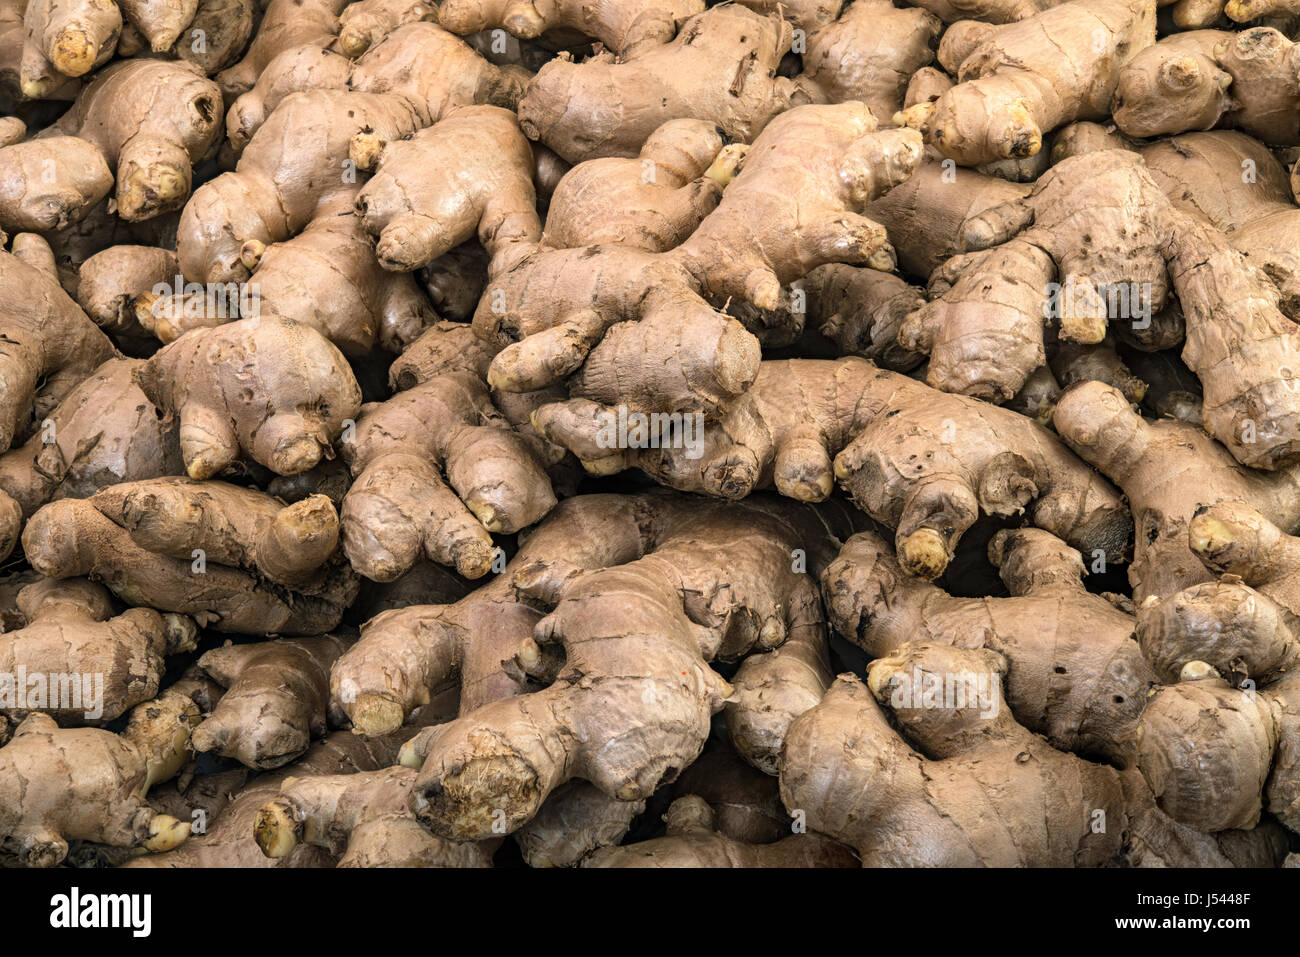 Fresh ginger roots display on sale in the fresh vegetable market Stock Photo